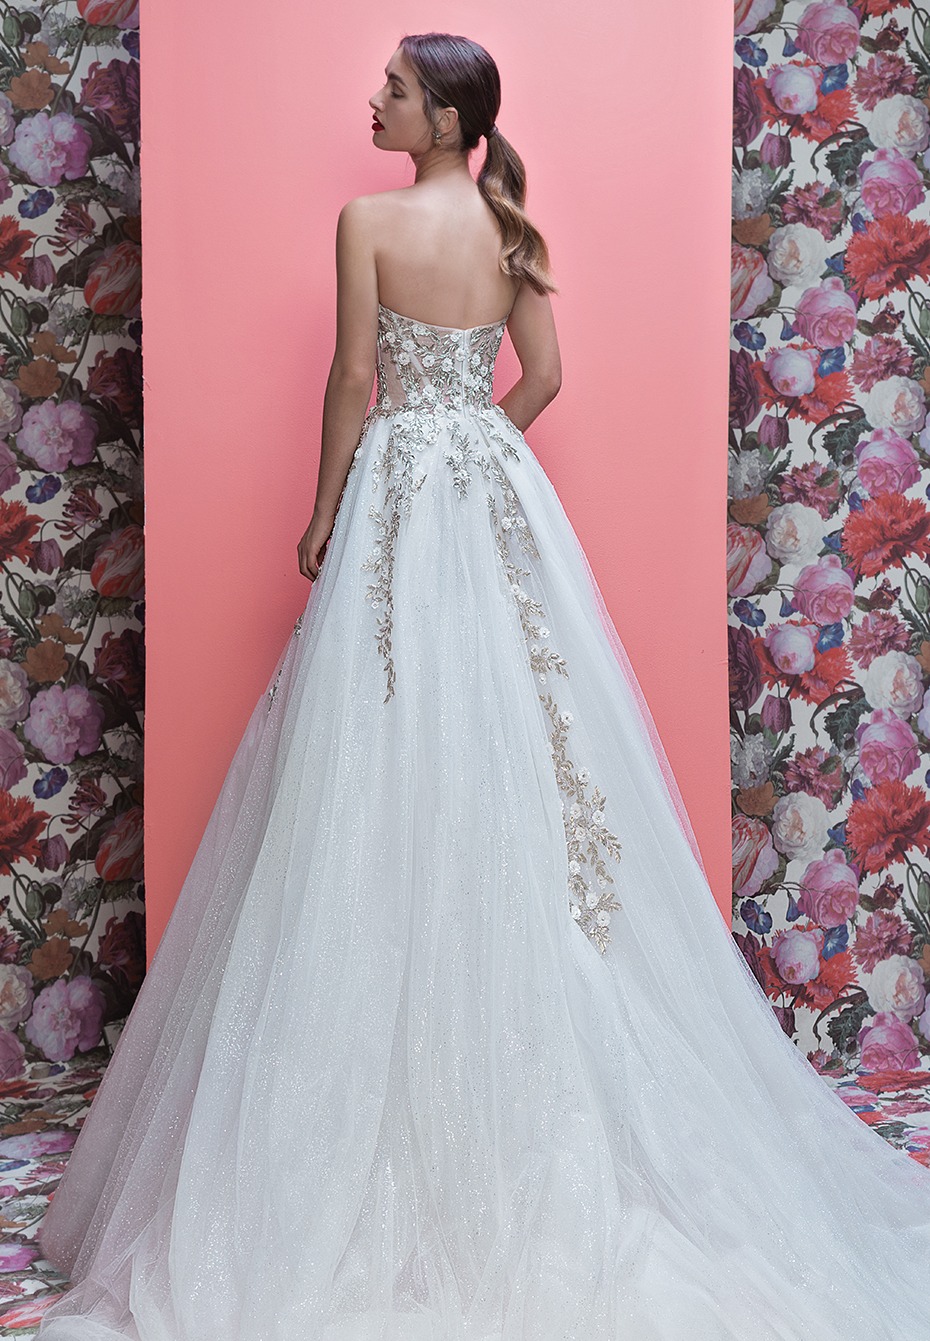 Silver and white wedding ball gown - The Aelin by Galia Lahav